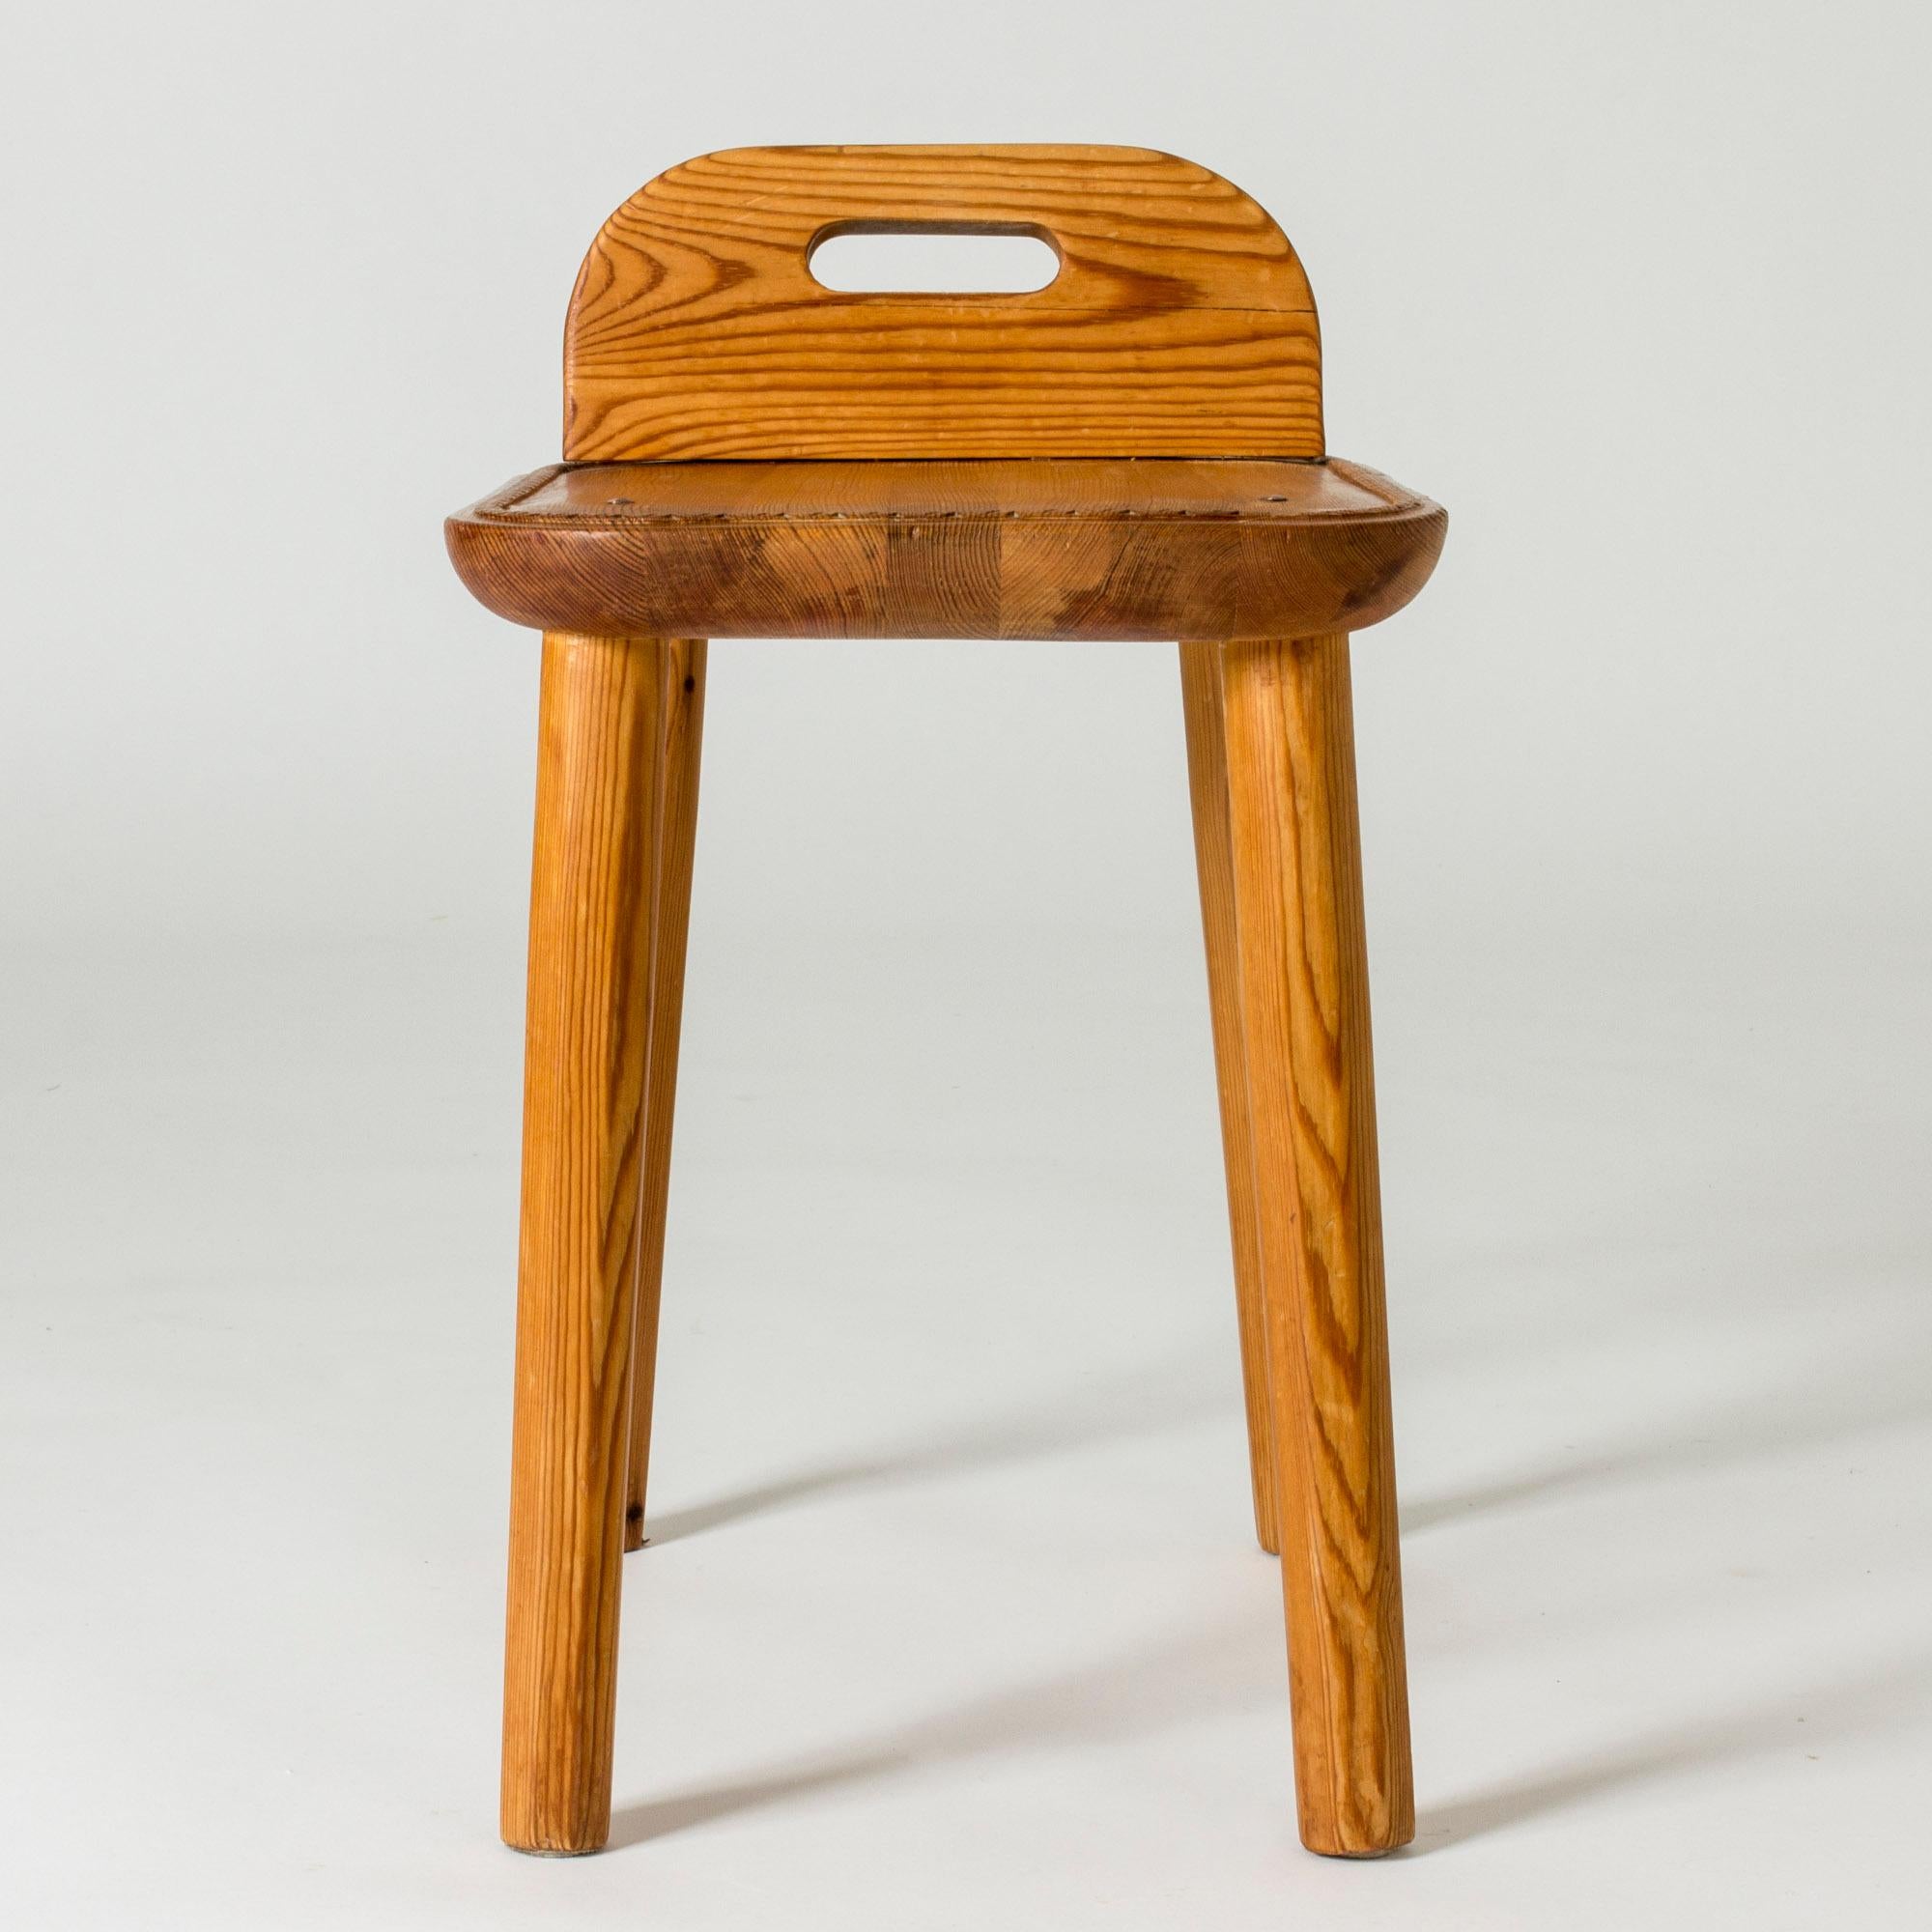 Cute Swedish midcentury pine stool, in a chunky design. Handle in the back and a decorative pattern around the edge of the seat.